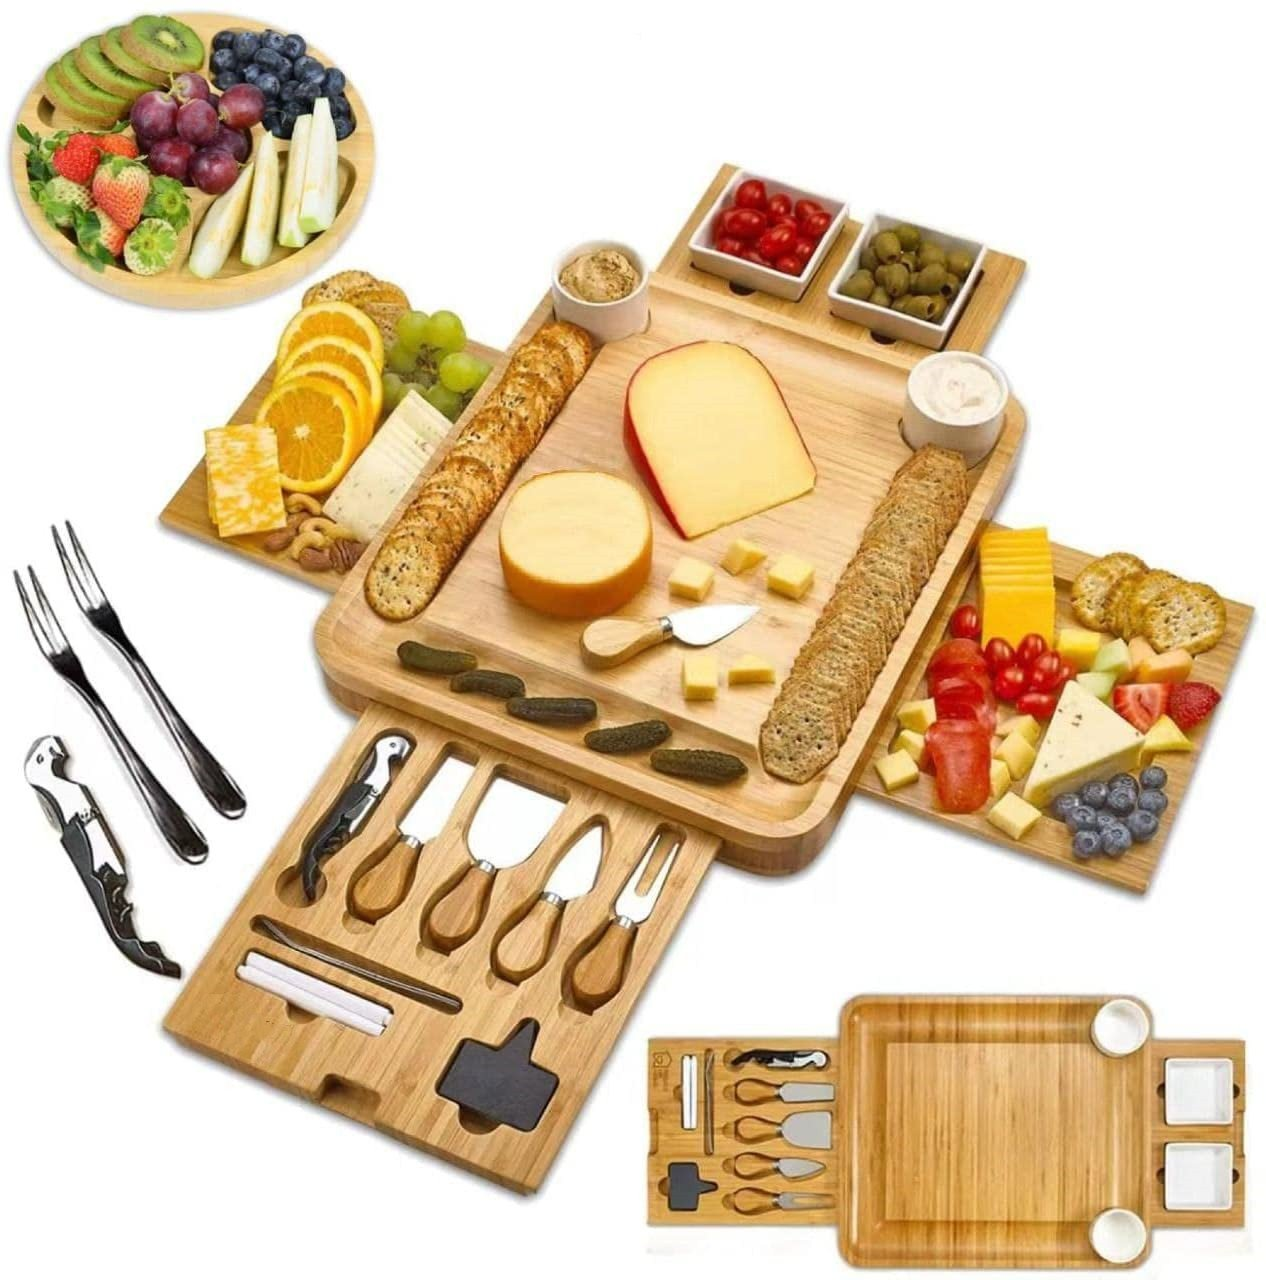 Cheese Board and Knife Set💖BUY 2 GET FREE SHIPPING🔥